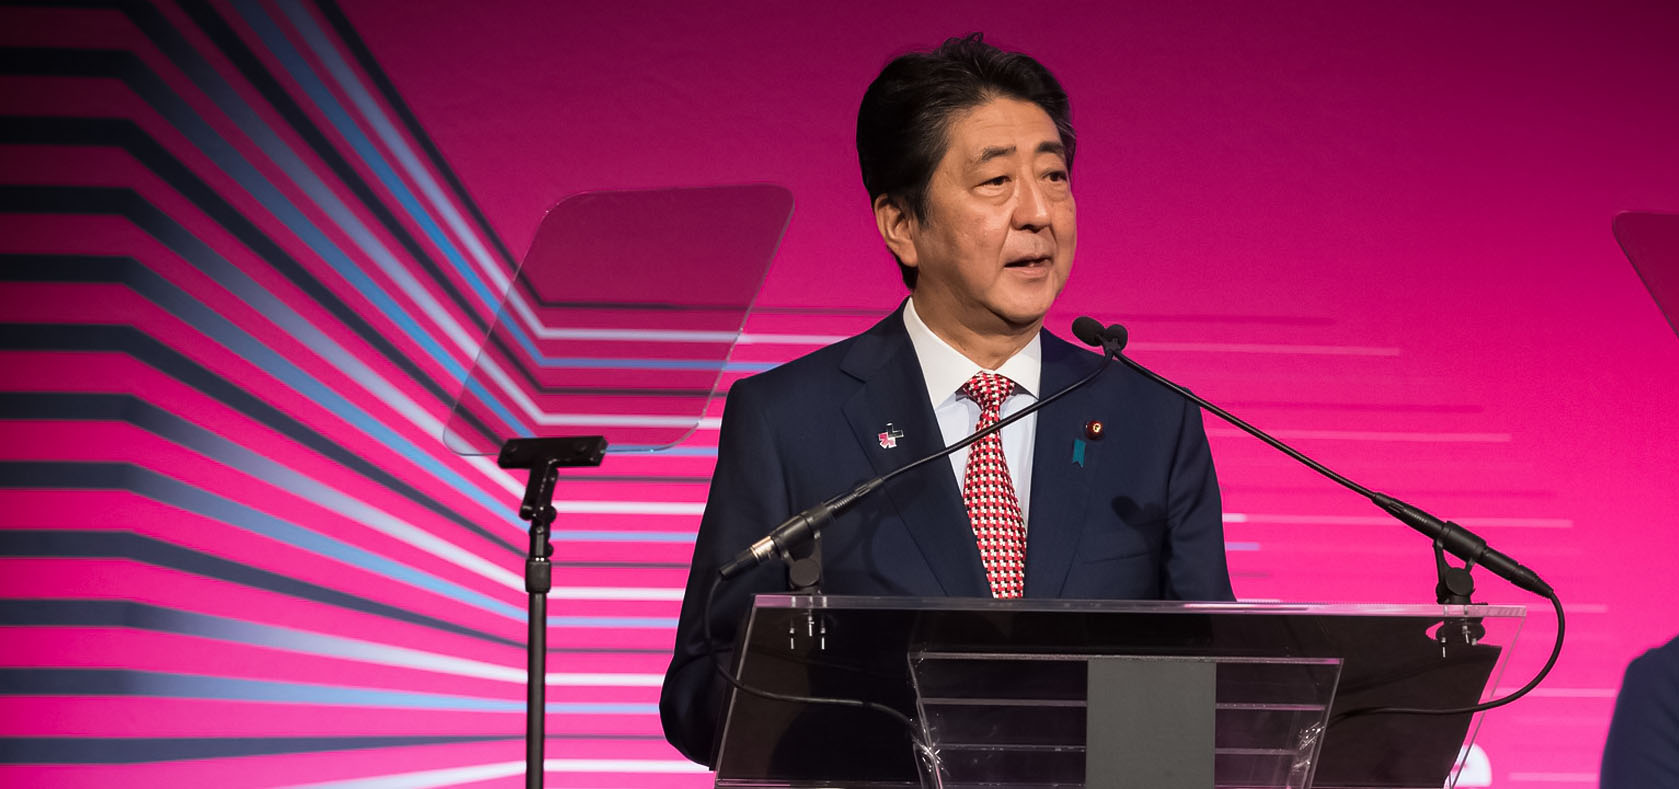 is Excellency and HeForShe Champion Shinzo Abe. Photo: UN Women